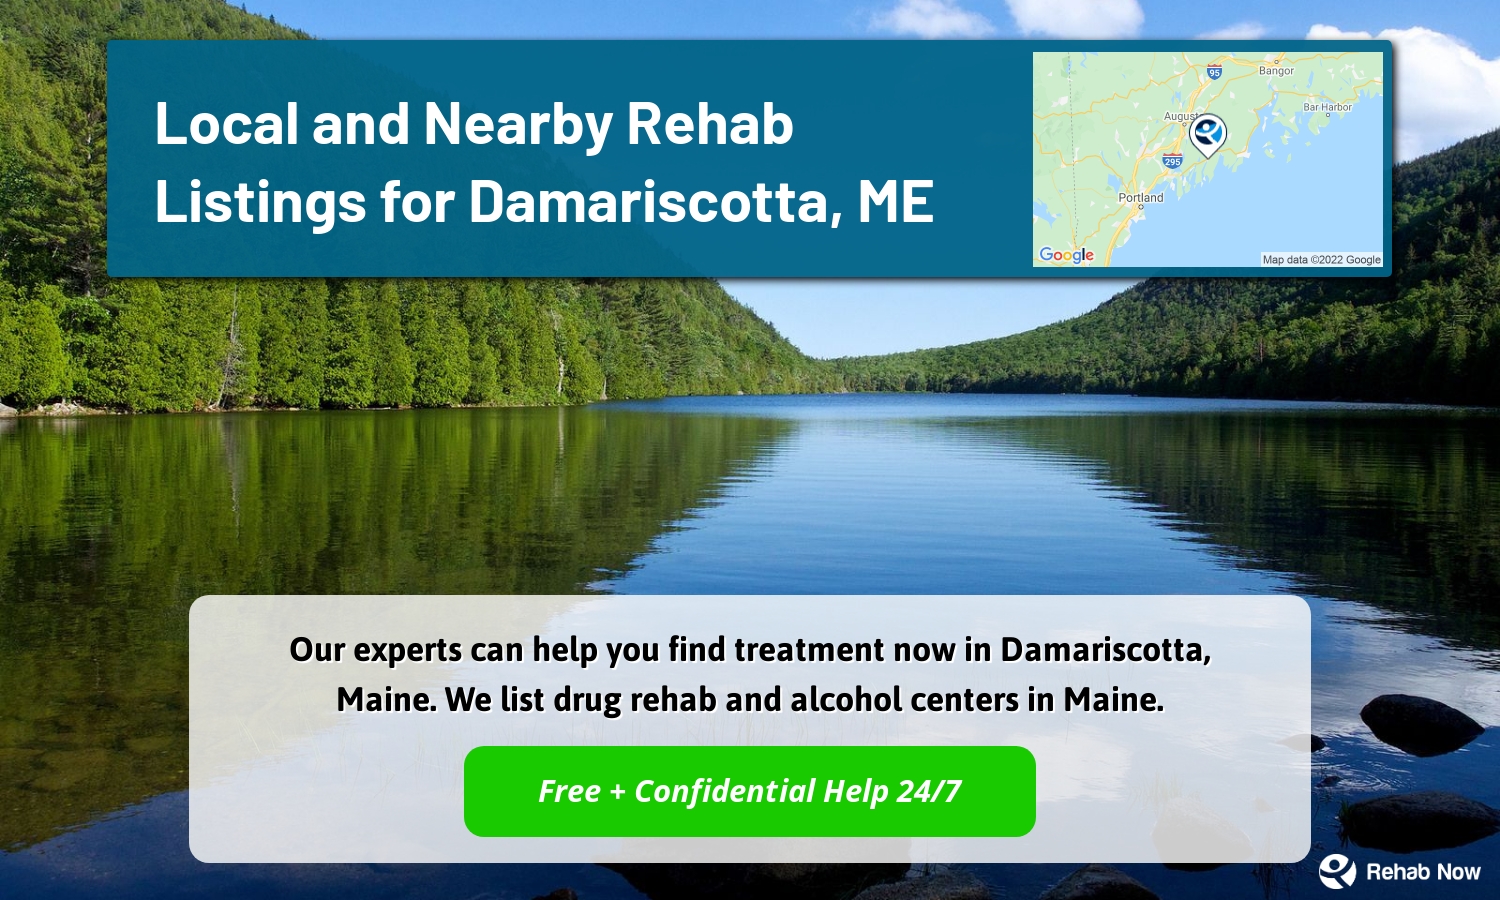 Our experts can help you find treatment now in Damariscotta, Maine. We list drug rehab and alcohol centers in Maine.